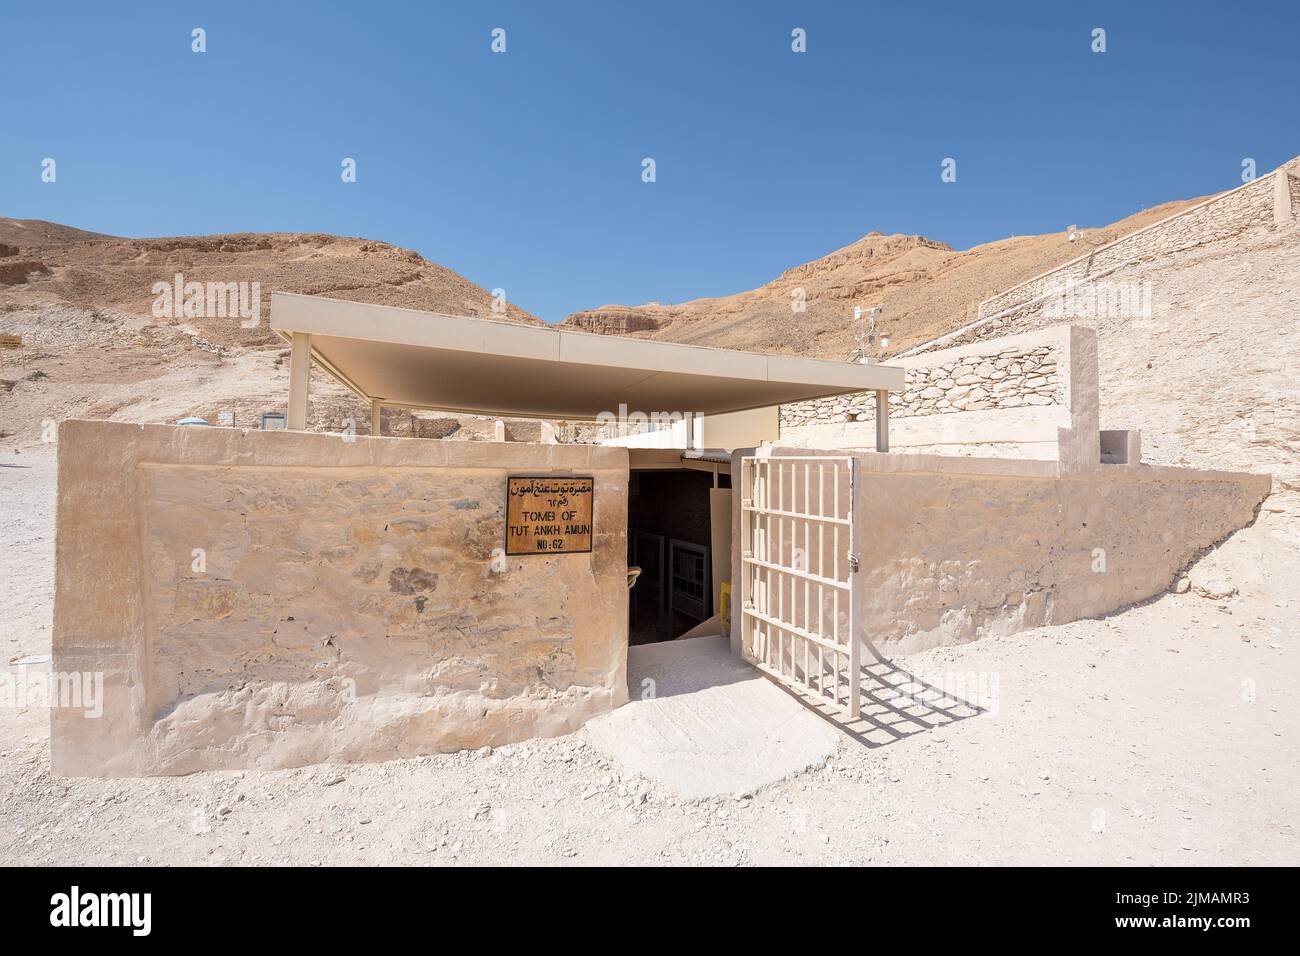 Luxor, Egypt; August 2, 2022 - Entrance to Tutankhamuns tomb in the Valley of the Kings, Luxor, Egypt Stock Photo